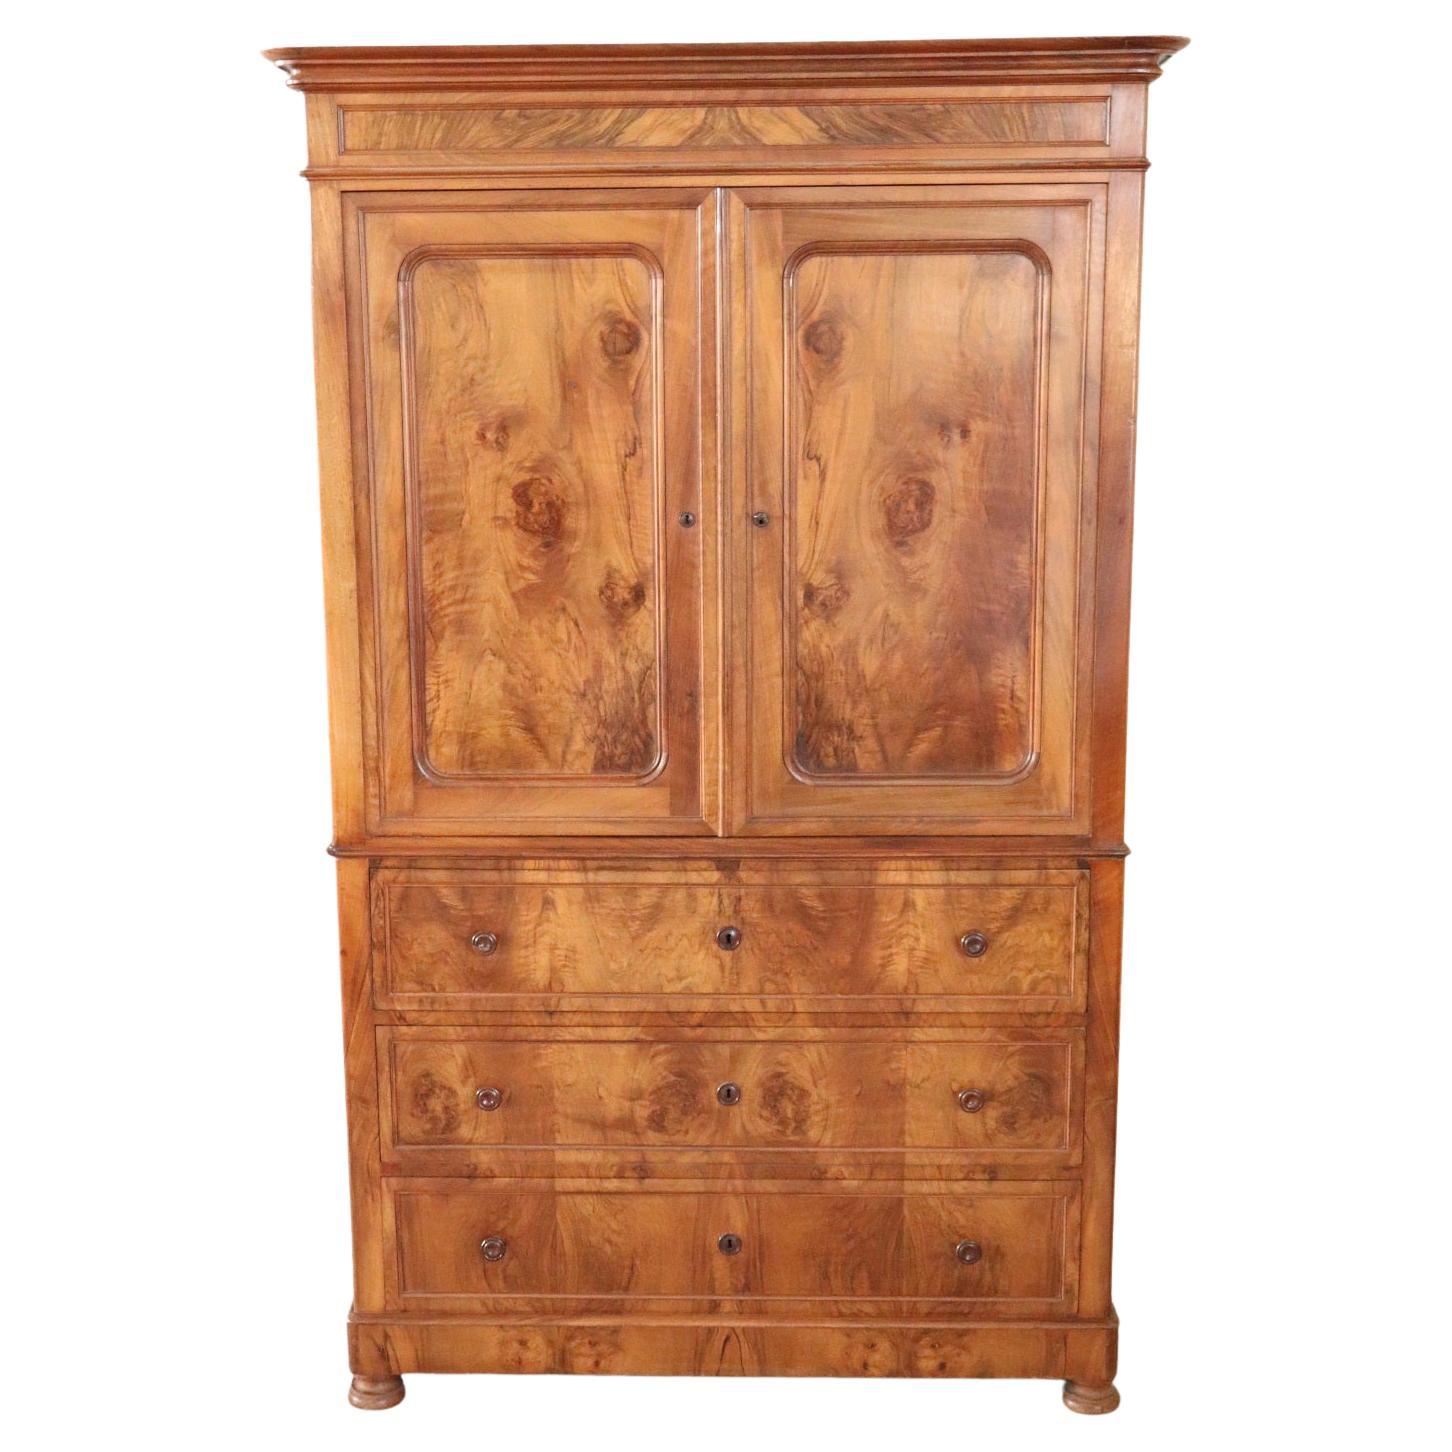 19th Century Walnut Antique Wardrobe with Writing Desk and Secret Compartments